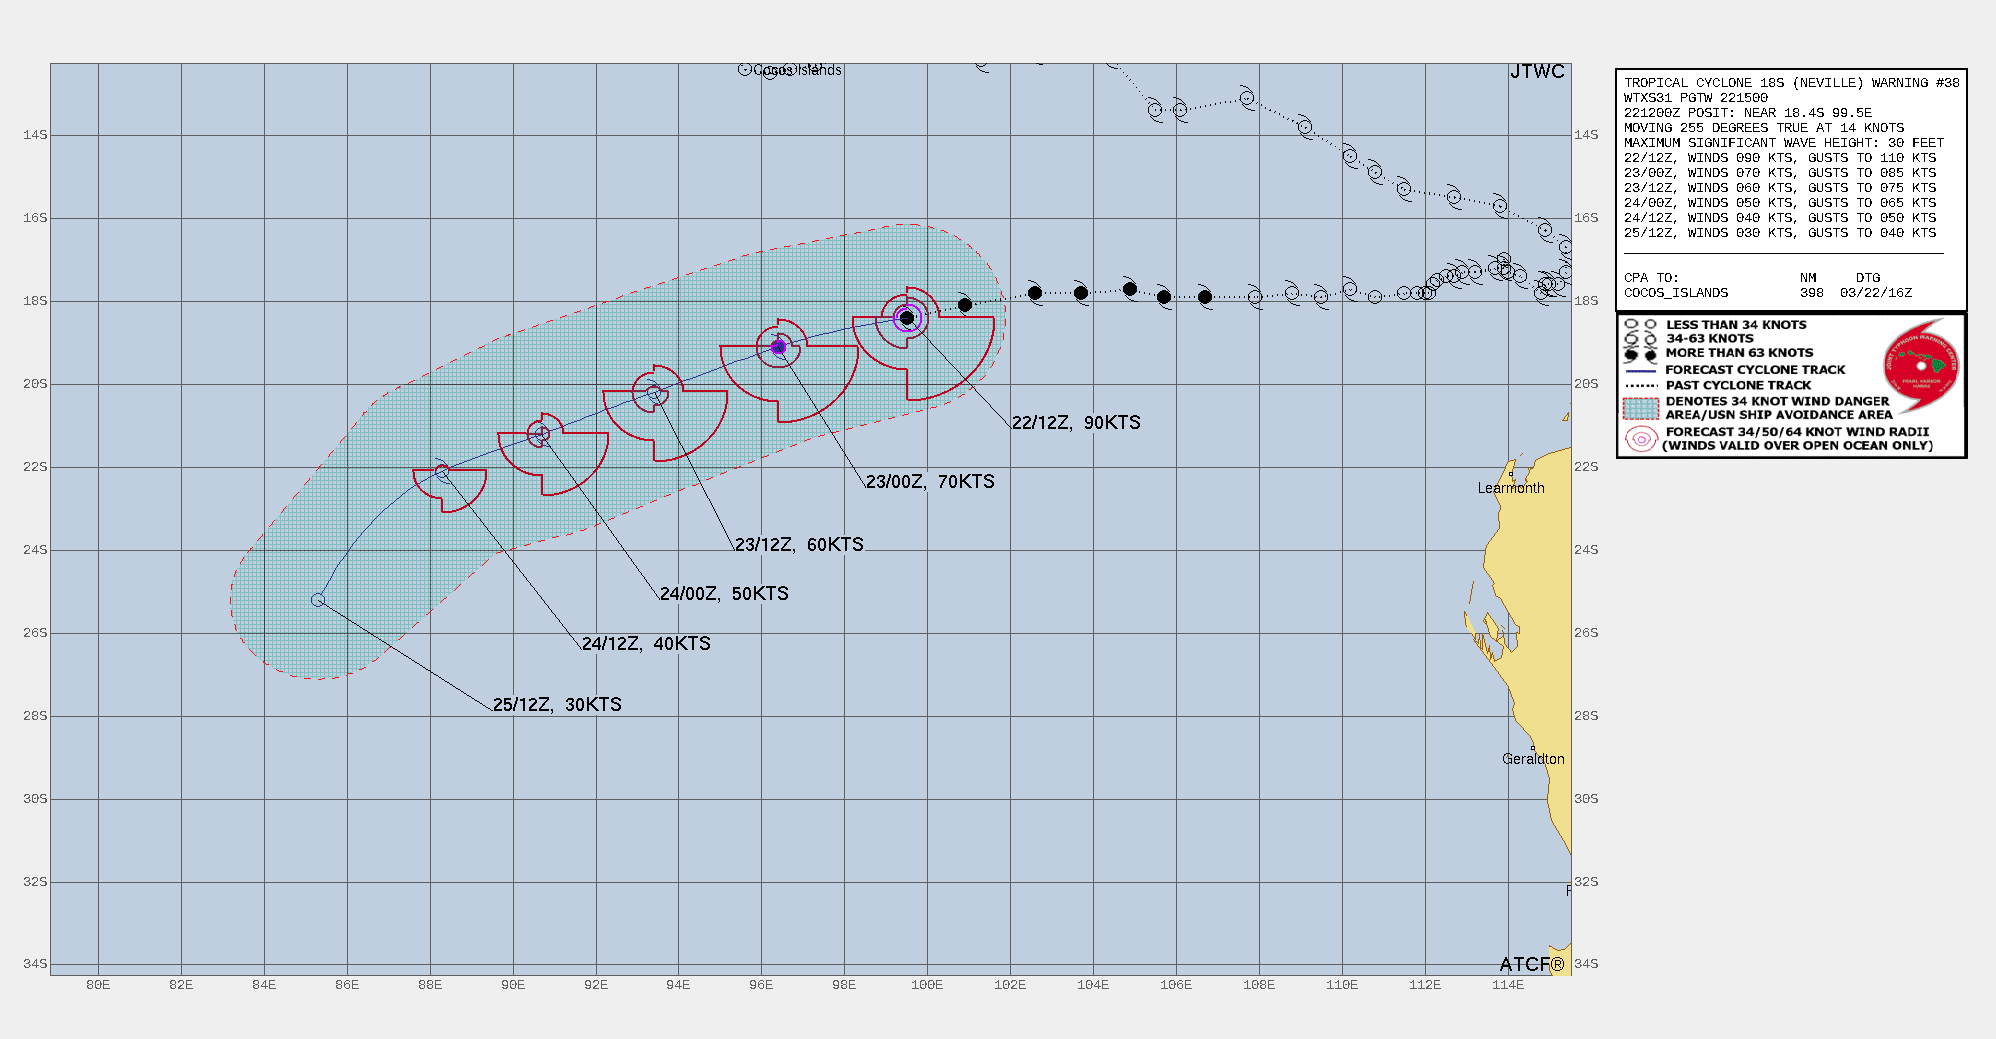 FORECAST REASONING.  SIGNIFICANT FORECAST CHANGES: THERE ARE NO SIGNIFICANT CHANGES TO THE FORECAST FROM THE PREVIOUS WARNING.  FORECAST DISCUSSION: TC 18S IS FORECAST TO CONTINUE ON A WEST-SOUTHWESTWARD TRACK THROUGH TAU 48 AS IT TRACKS ALONG THE NORTHWESTERN PERIPHERY OF THE STR TO THE SOUTH. AFTER TAU 48, THE SYSTEM IS FORECAST TO TURN MORE POLEWARD (SOUTHWESTWARD) AS 18S  ROUNDS THE WESTERN EXTENT OF THE STR. REGARDING INTENSITY, TC 18S IS  EXPECTED TO CONTINUE TO WEAKEN AS VWS VALUES REMAIN HIGH, SEA SURFACE TEMPERATURES DECREASE, AND DRY AIR ENTRAINS THE SYSTEM. ADDITIONALLY, A PRONOUNCED SHORTWAVE TROUGH IS POSITIONED TO THE WEST AND WILL AID IN DISSIPATION AS 18S ENCROACHES THE TROUGH. THE  SYSTEM IS FORECAST TO WEAKEN TO 70 KTS NEAR TAU 12, 60 KTS NEAR TAU  24, 50 KTS NEAR TAU 36, AND 40 KTS NEAR TAU 48. BY TAU 72, TC 18S IS ANTICIPATED TO HAVE ENTIRELY DISSIPATED.